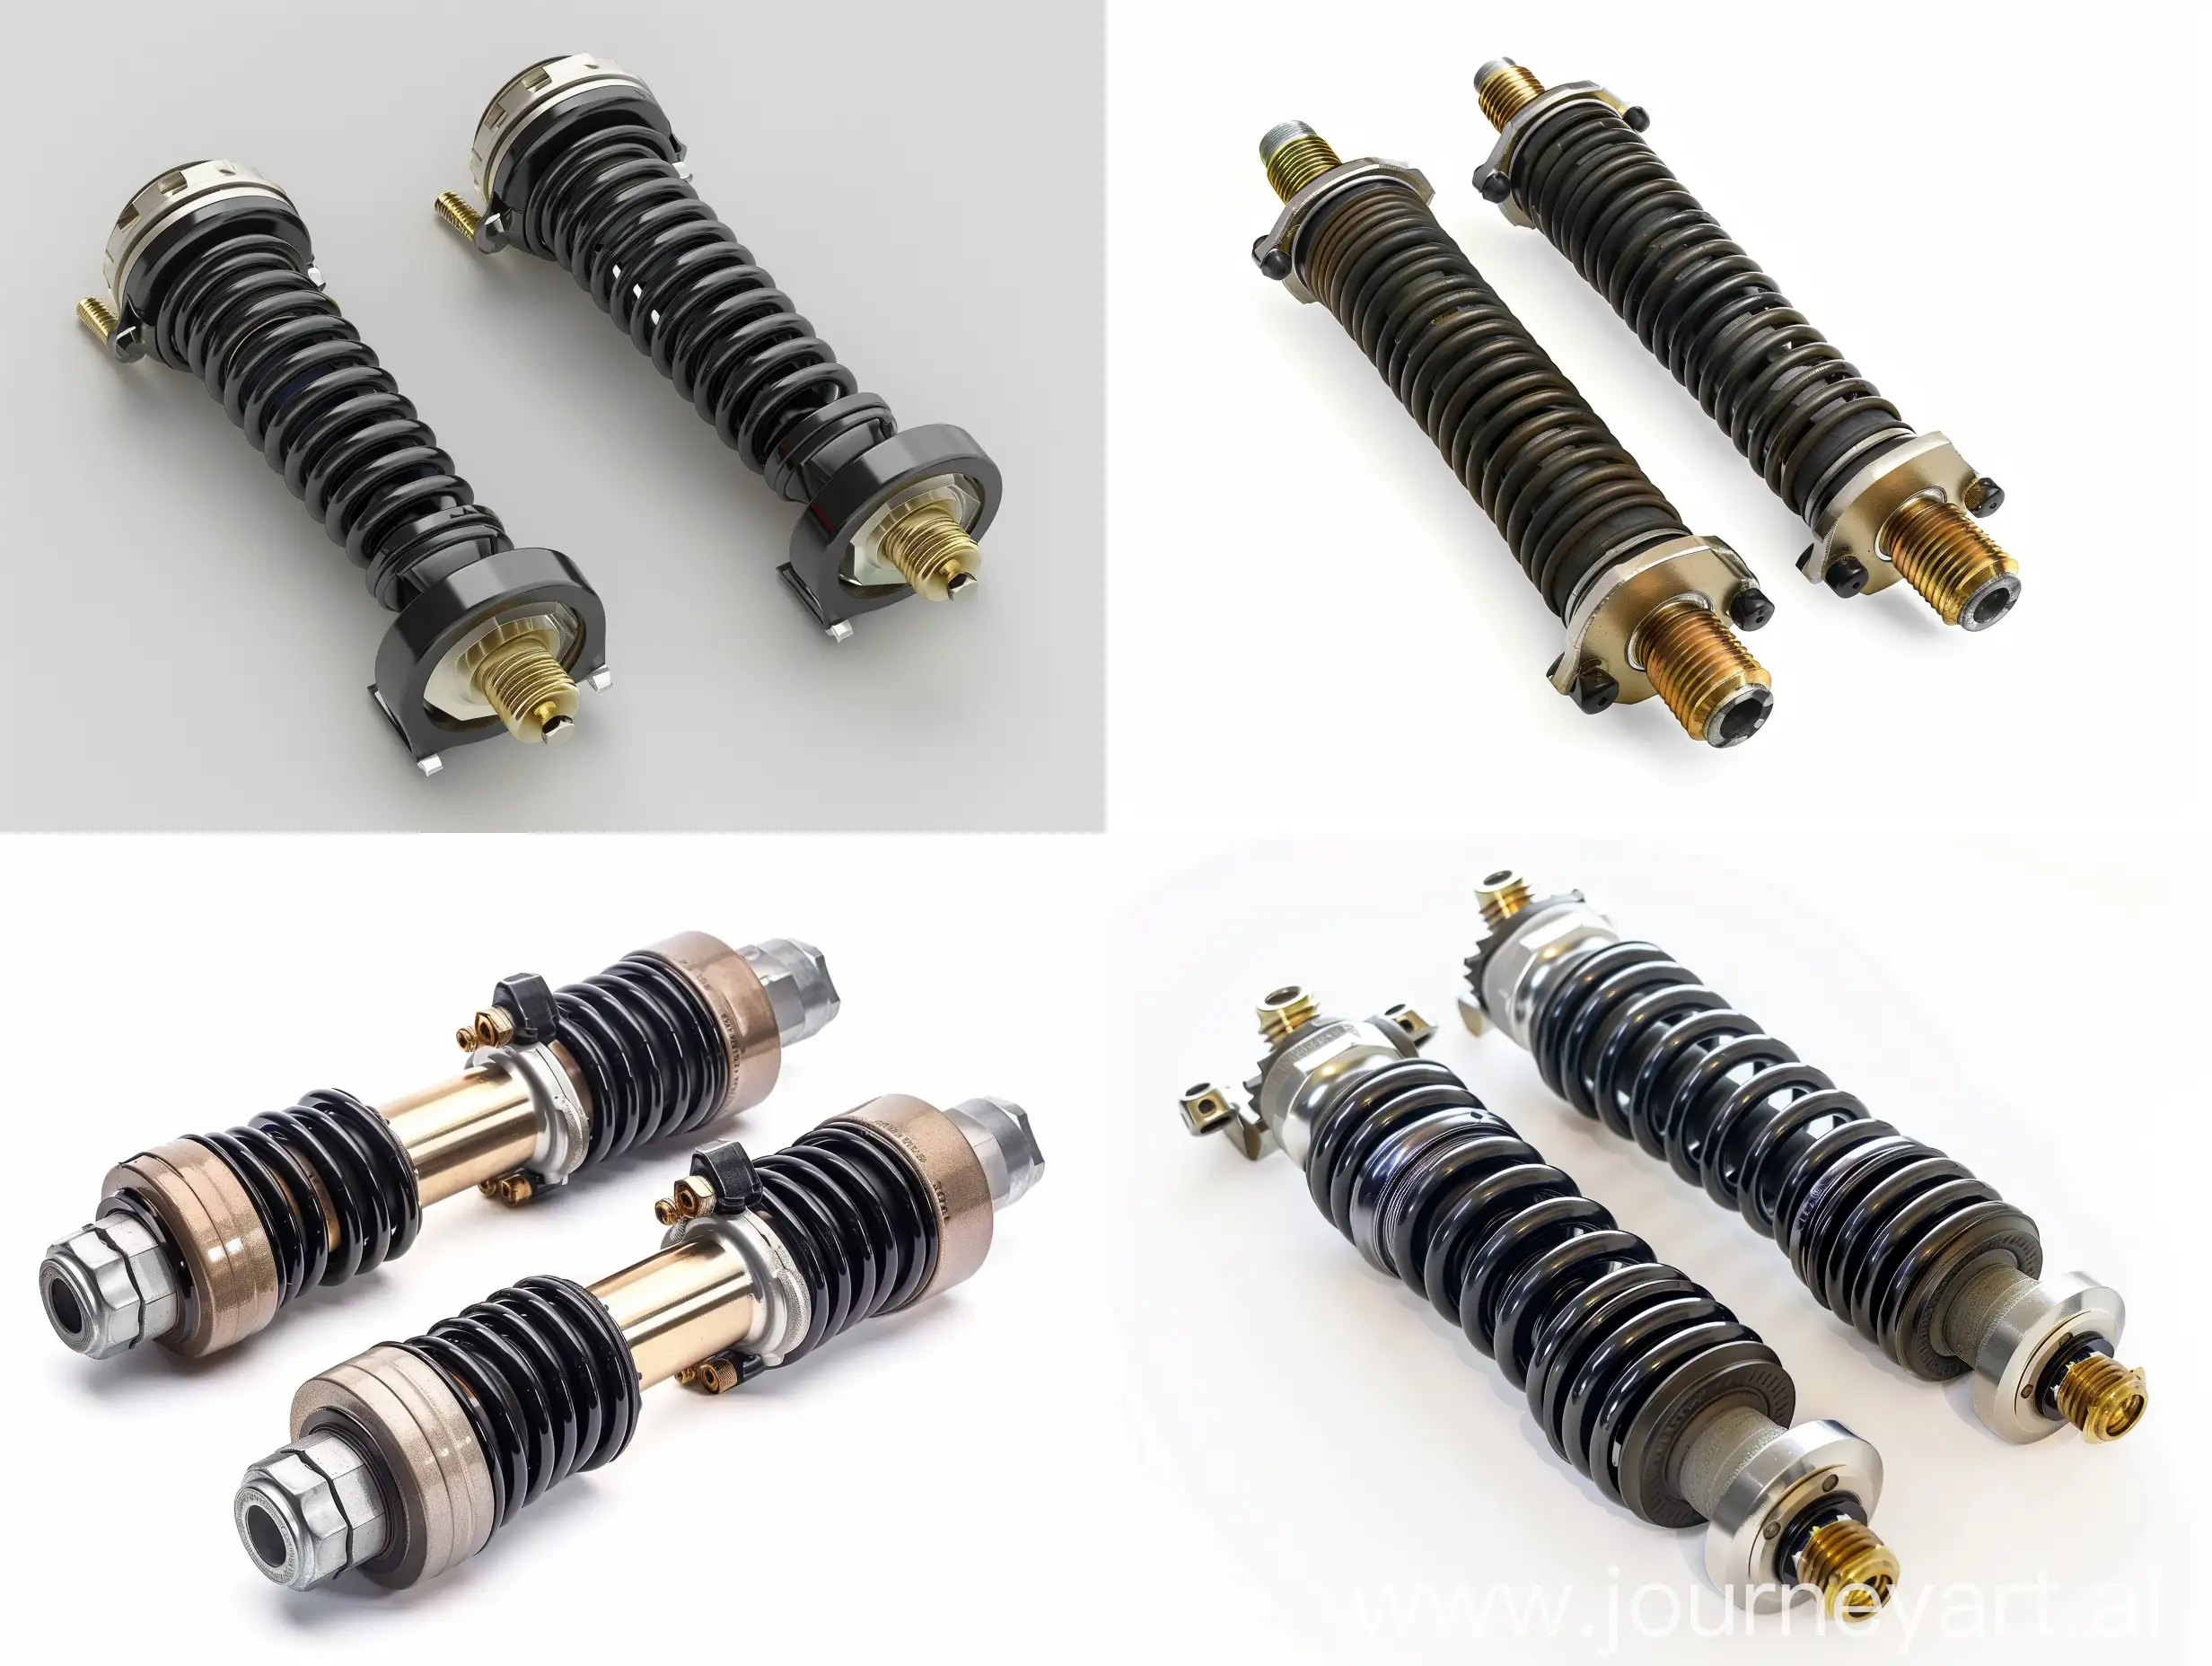 A pair of car shock absorbers

